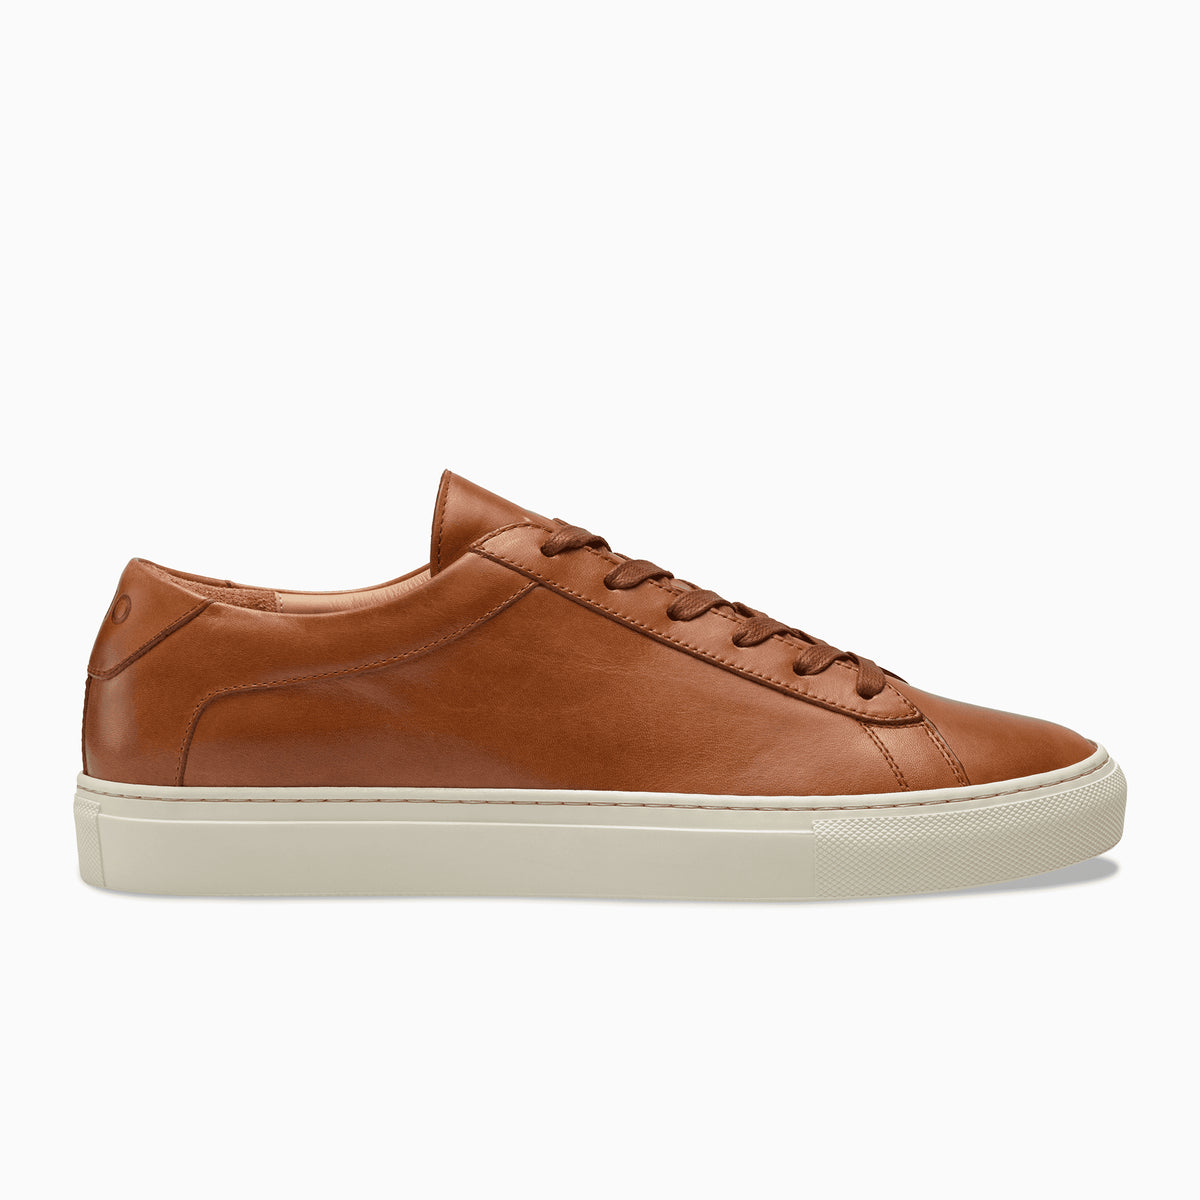 brown casual shoes with white sole